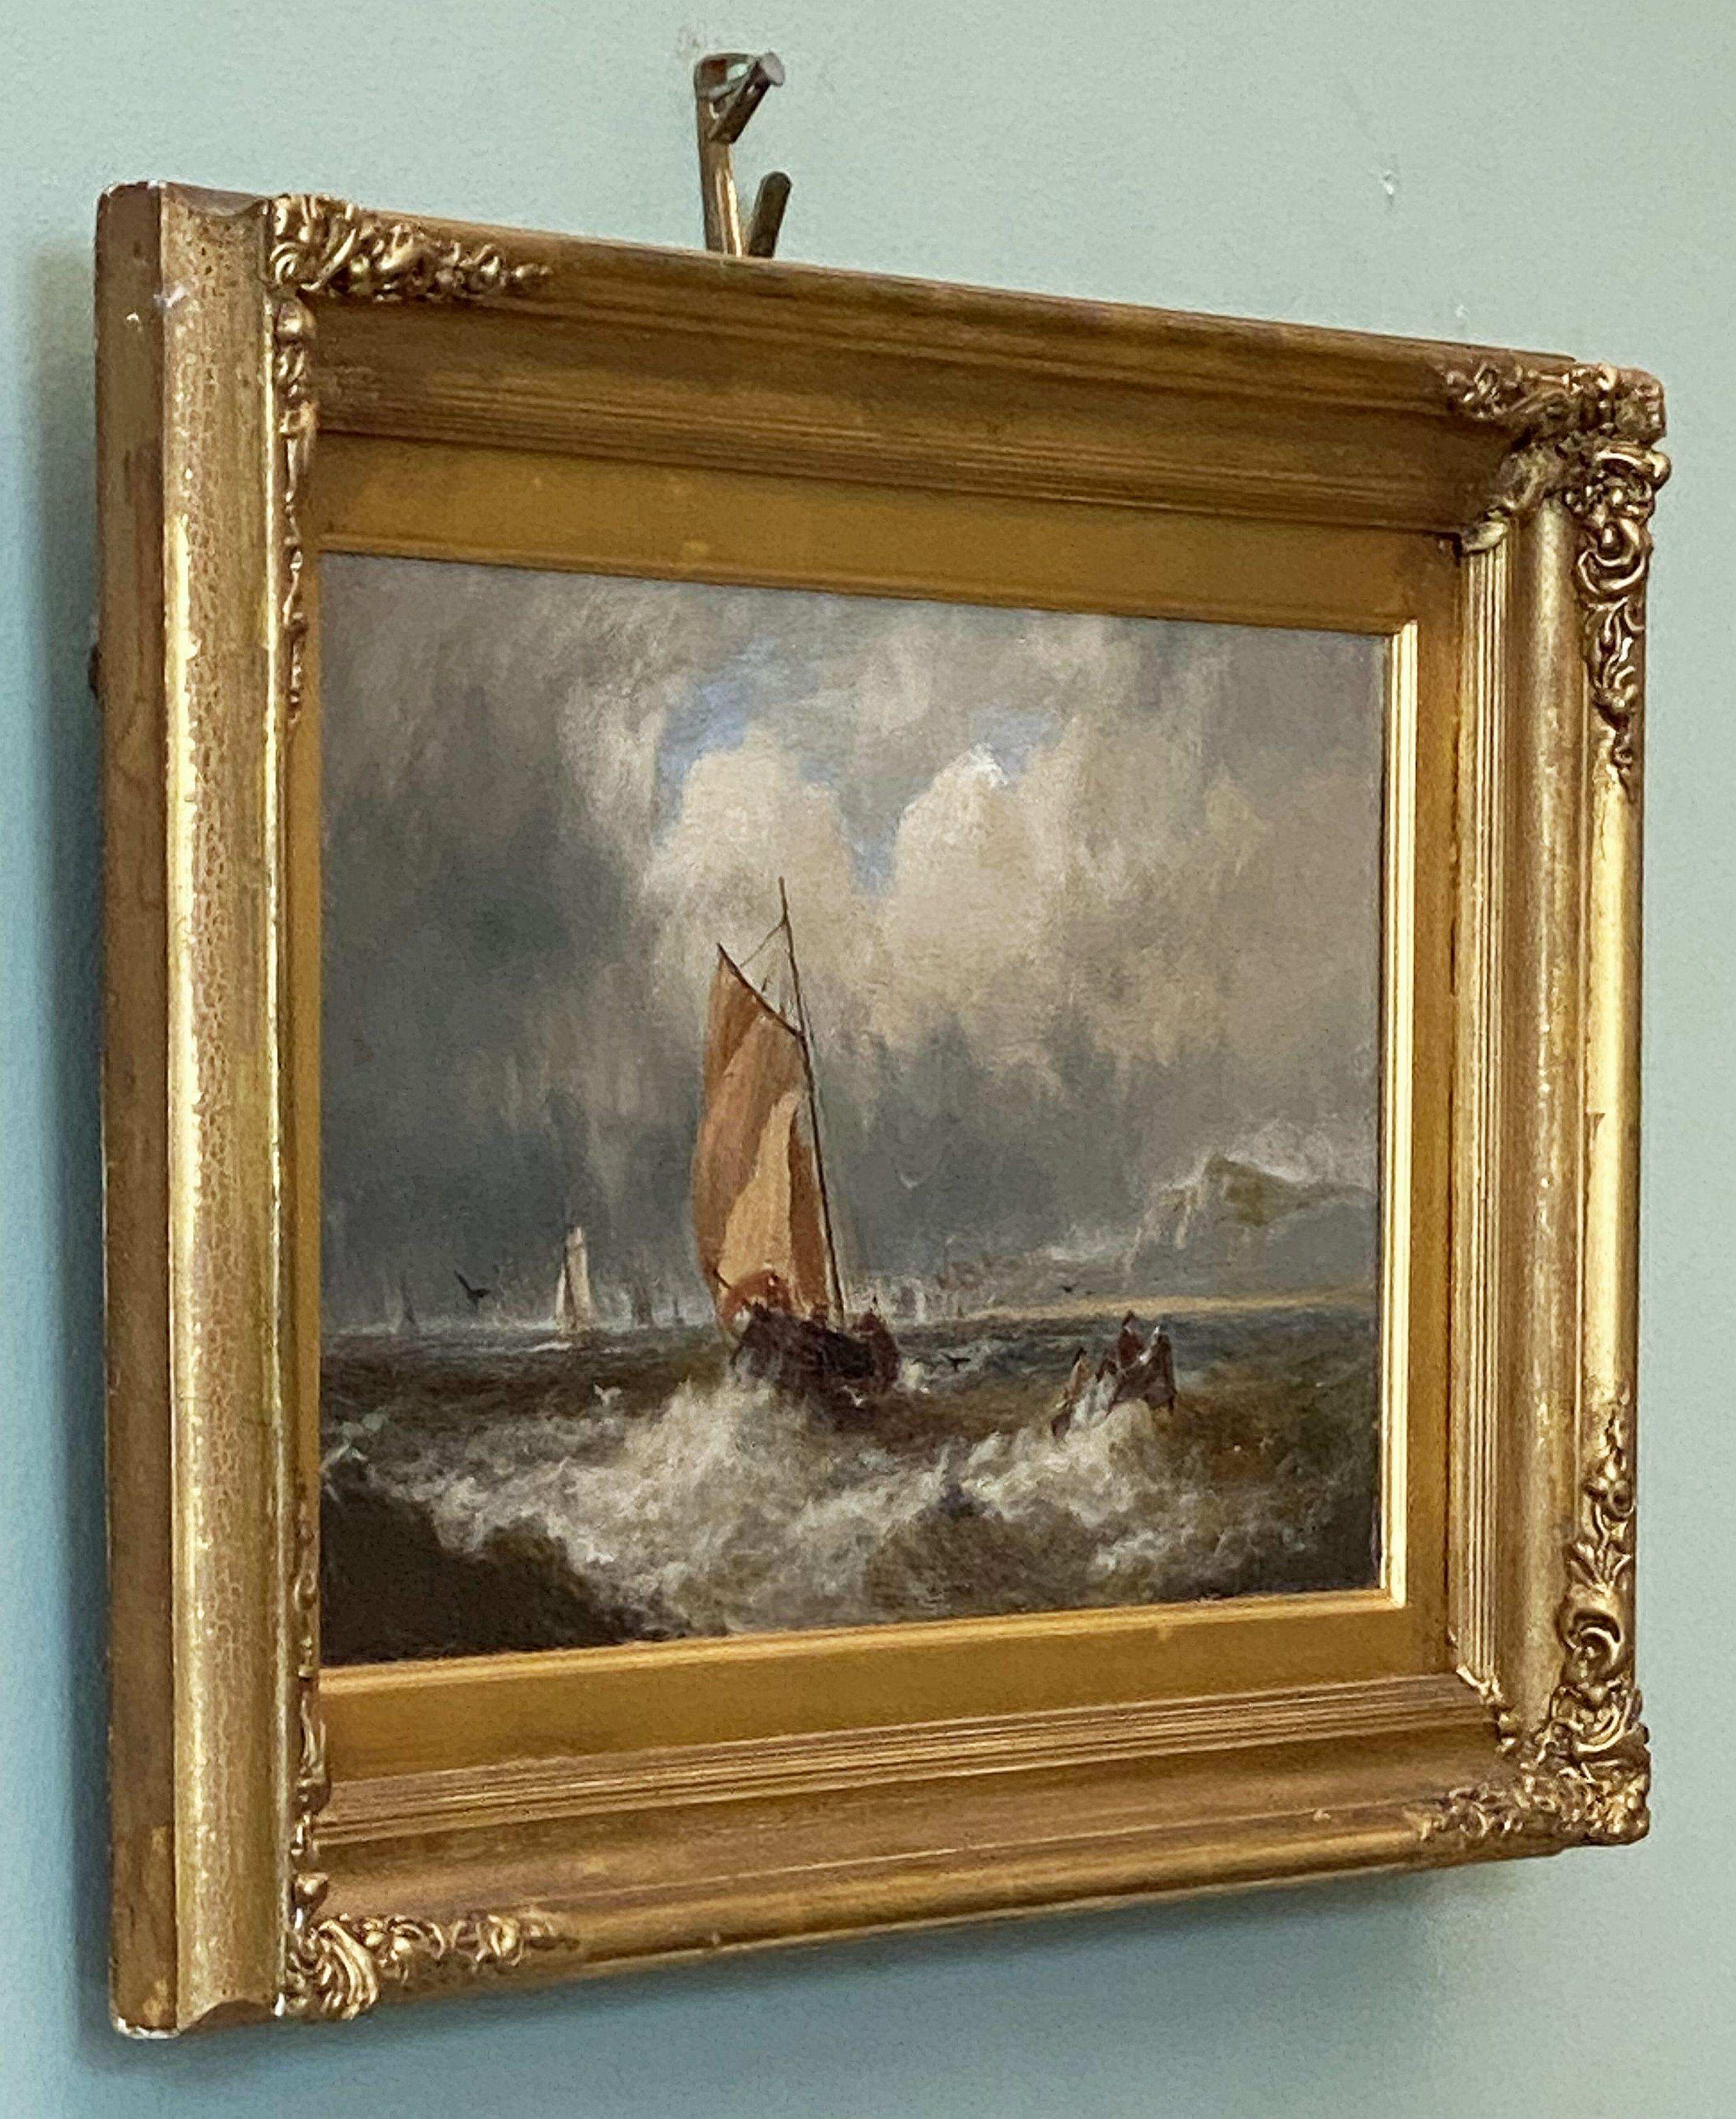 A handsome English oil painting on canvas featuring a seascape or ocean scene with ship - A fine example of British marine art of the 19th century.
Mounted in a giltwood frame.

 